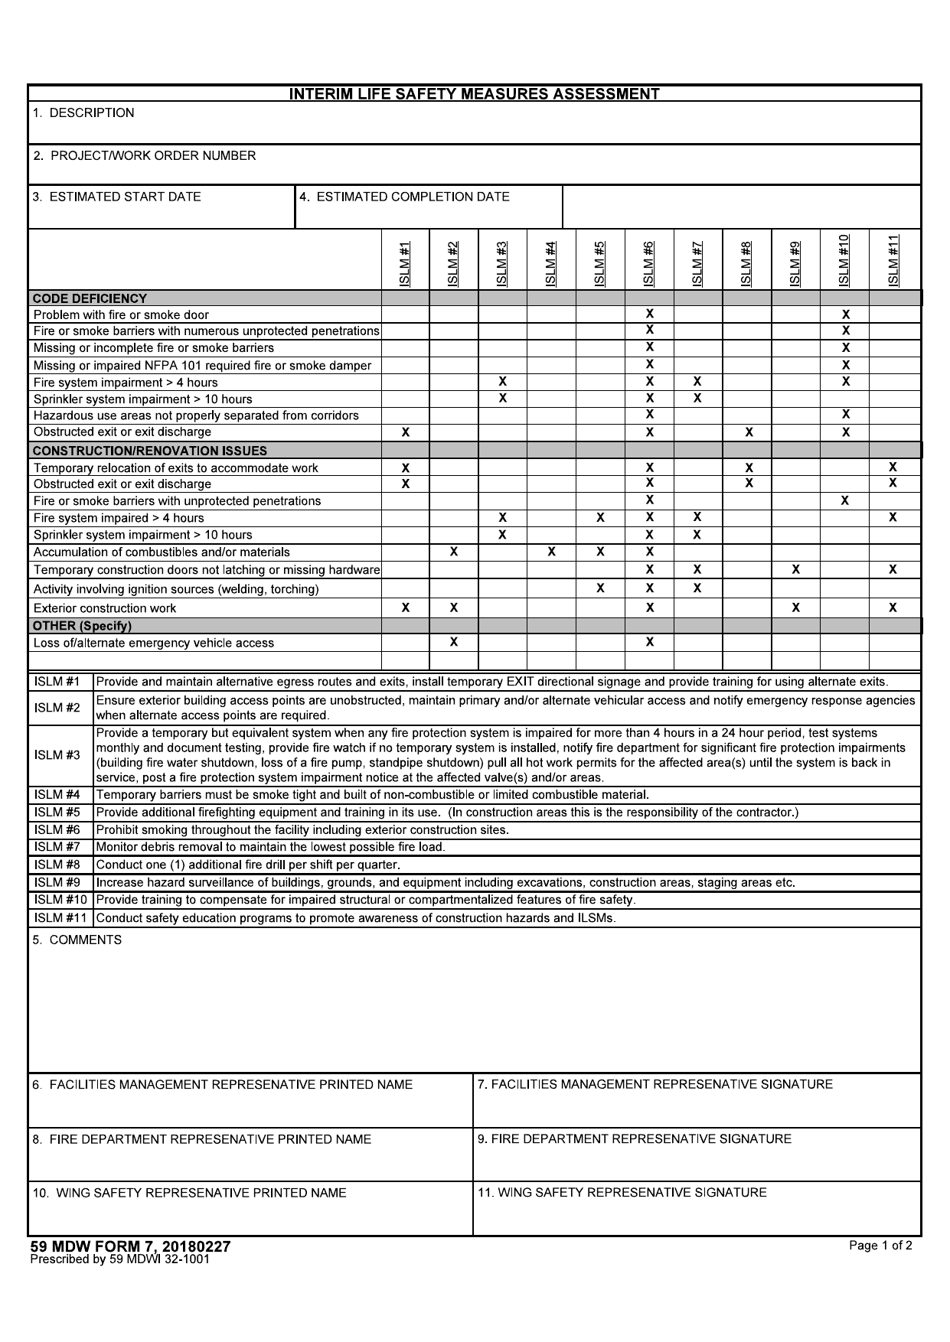 59 MDW Form 7 Interim Life Safety Measures Assessment, Page 1